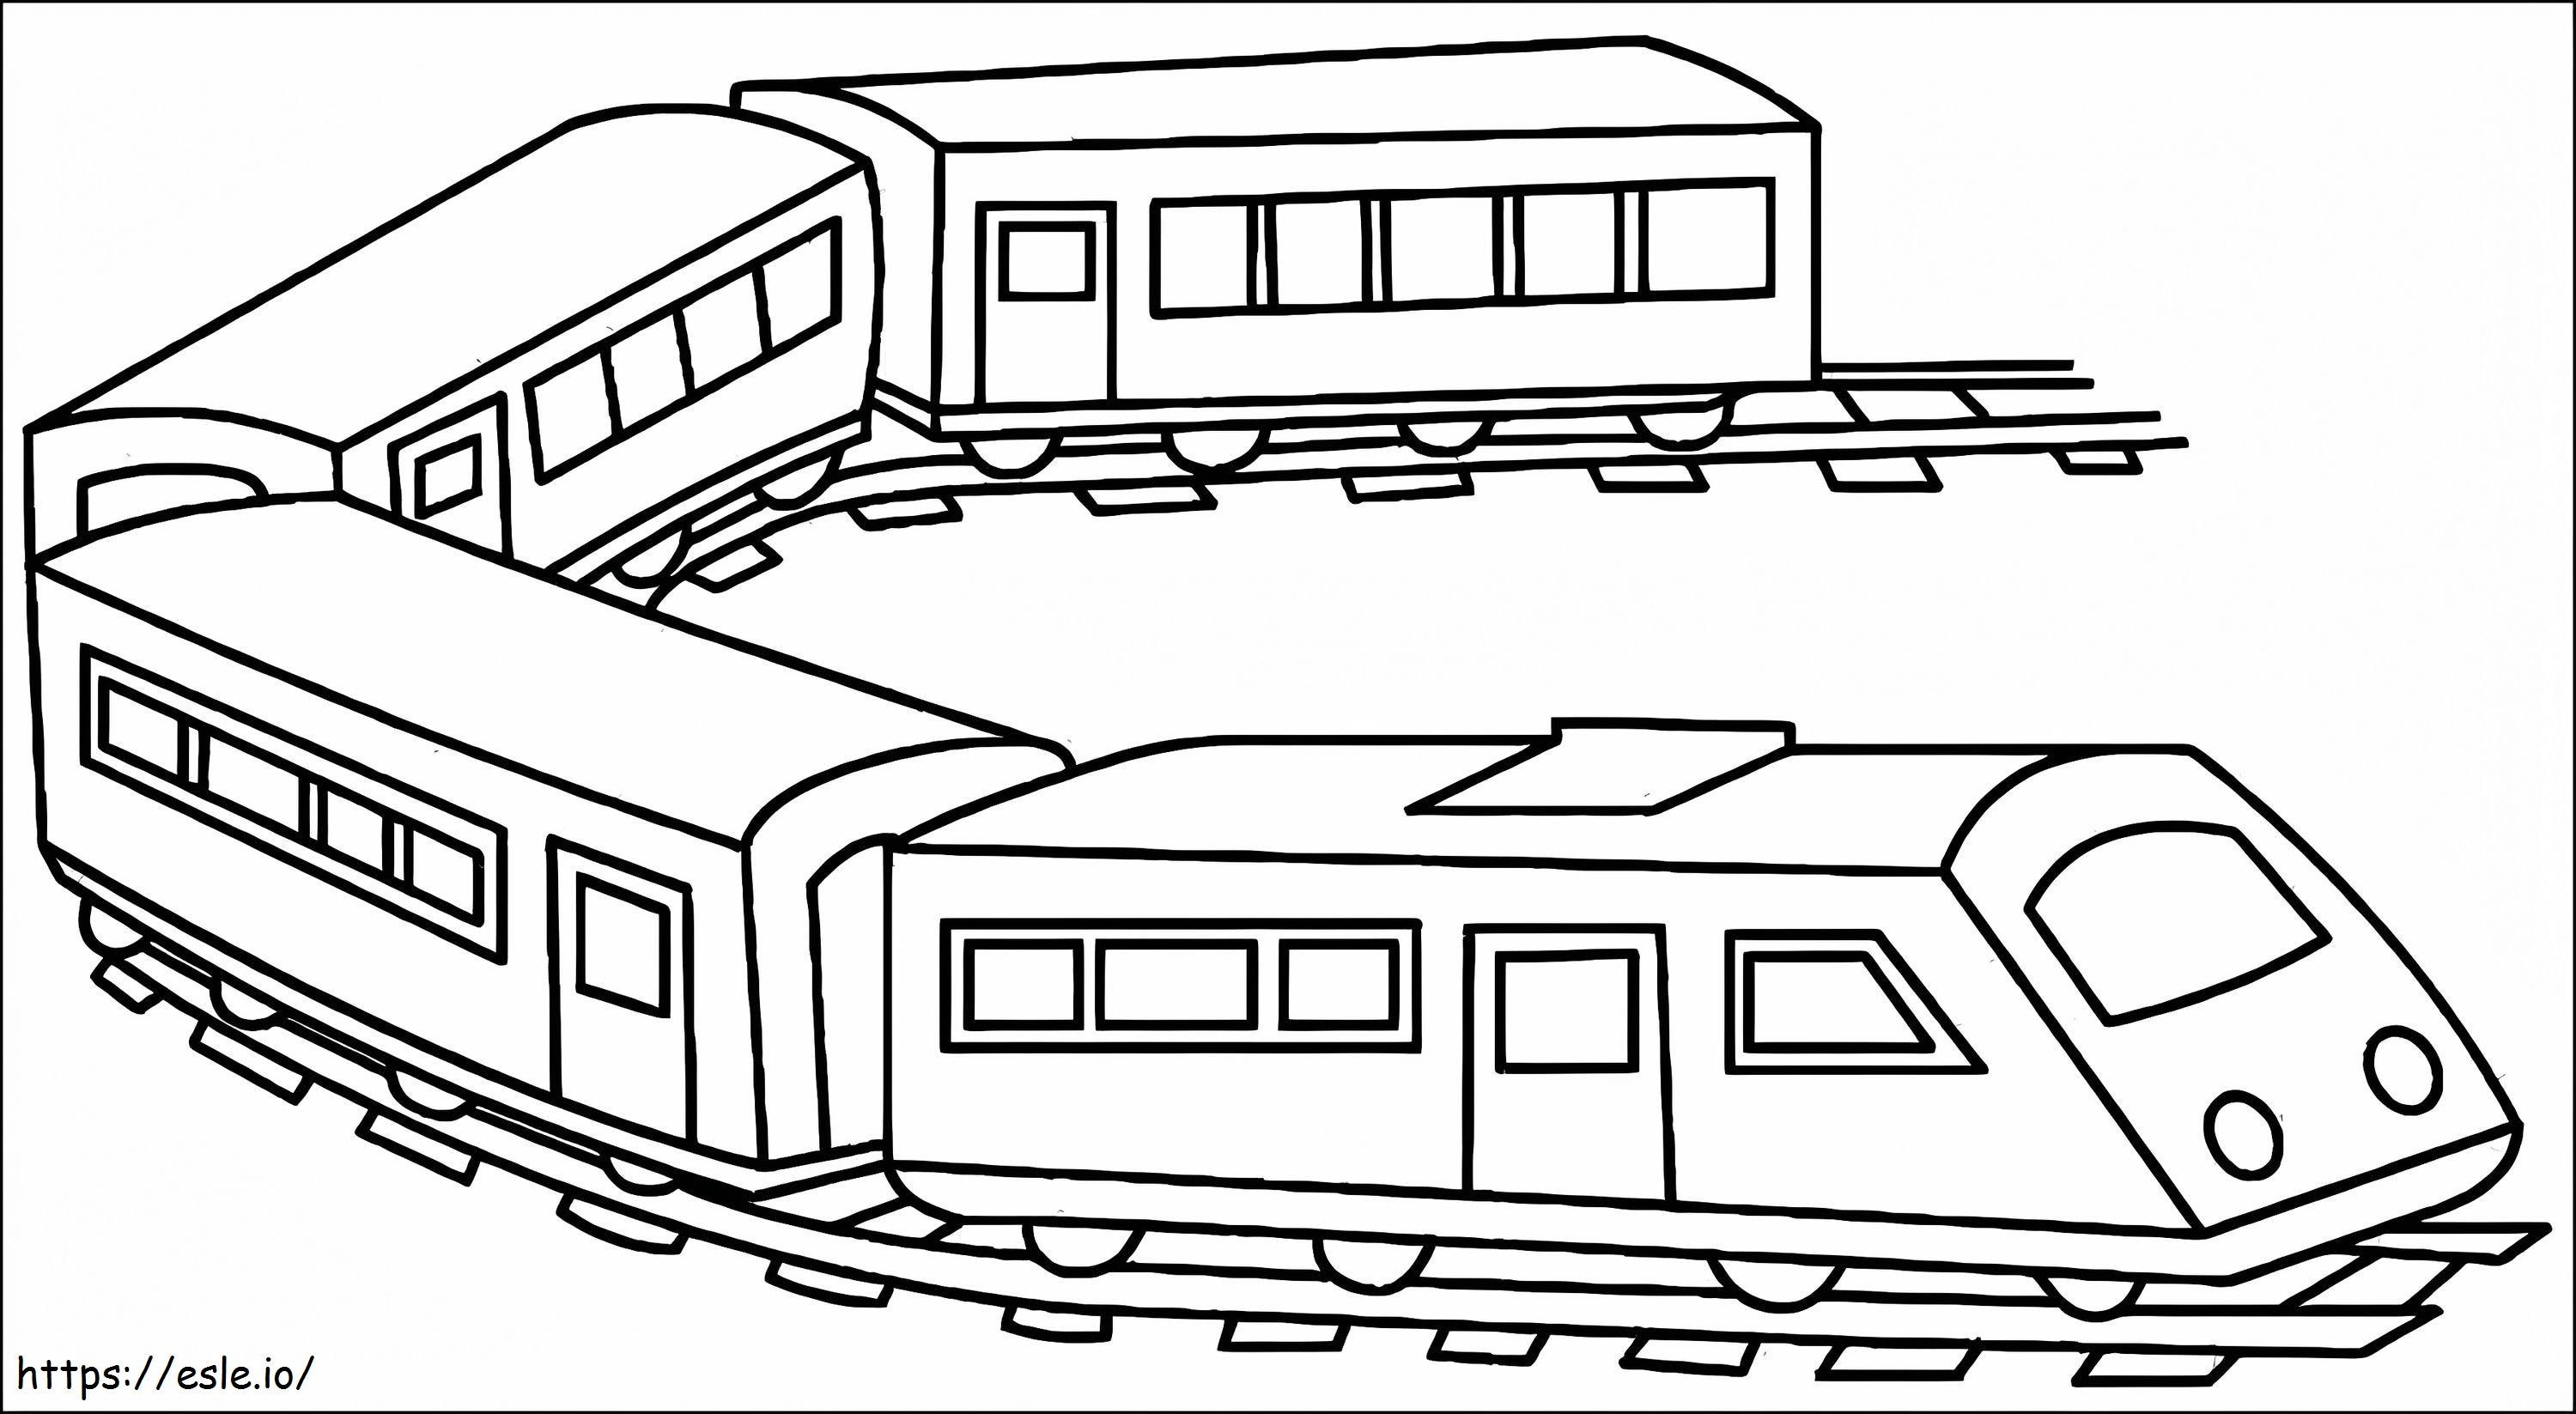 Train With 4 Carriages coloring page